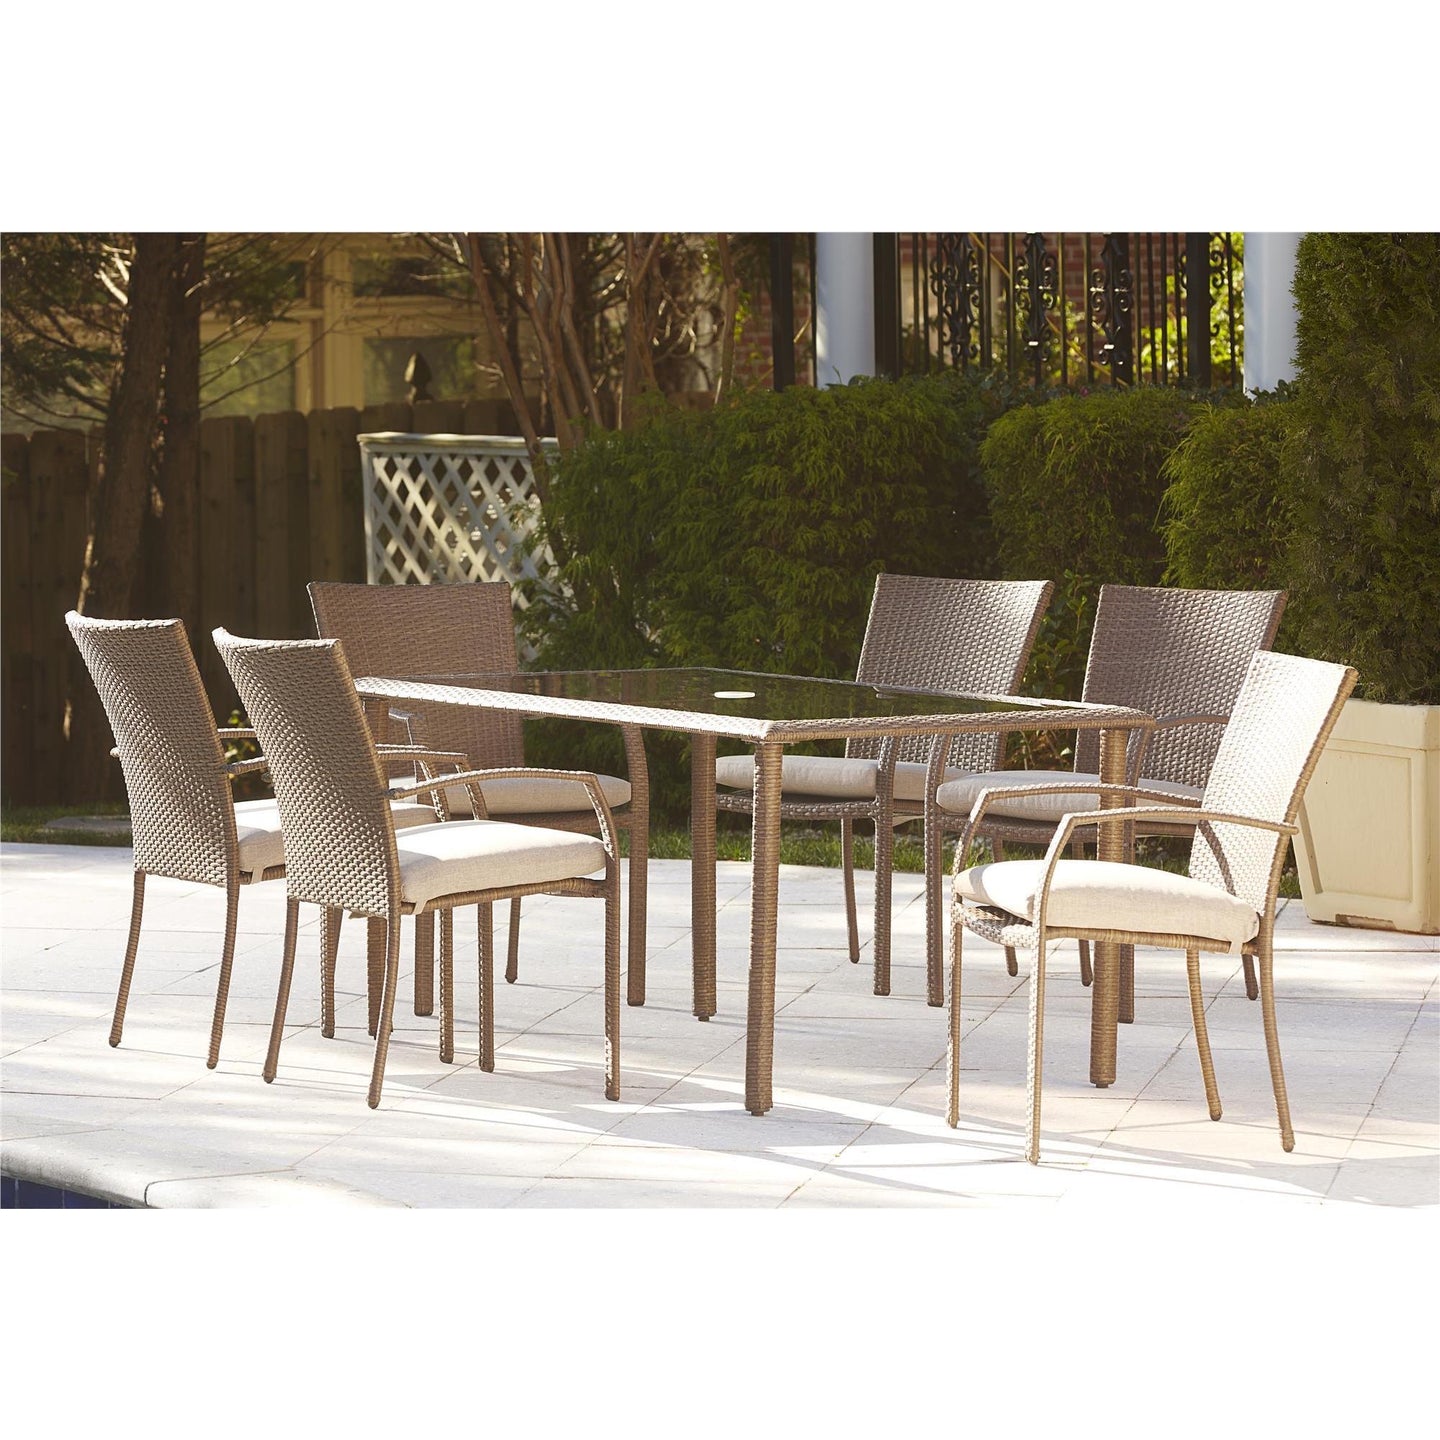 Cosco Lakewood Ranch Steel Wicker Outdoor Dining Table Brown(764)